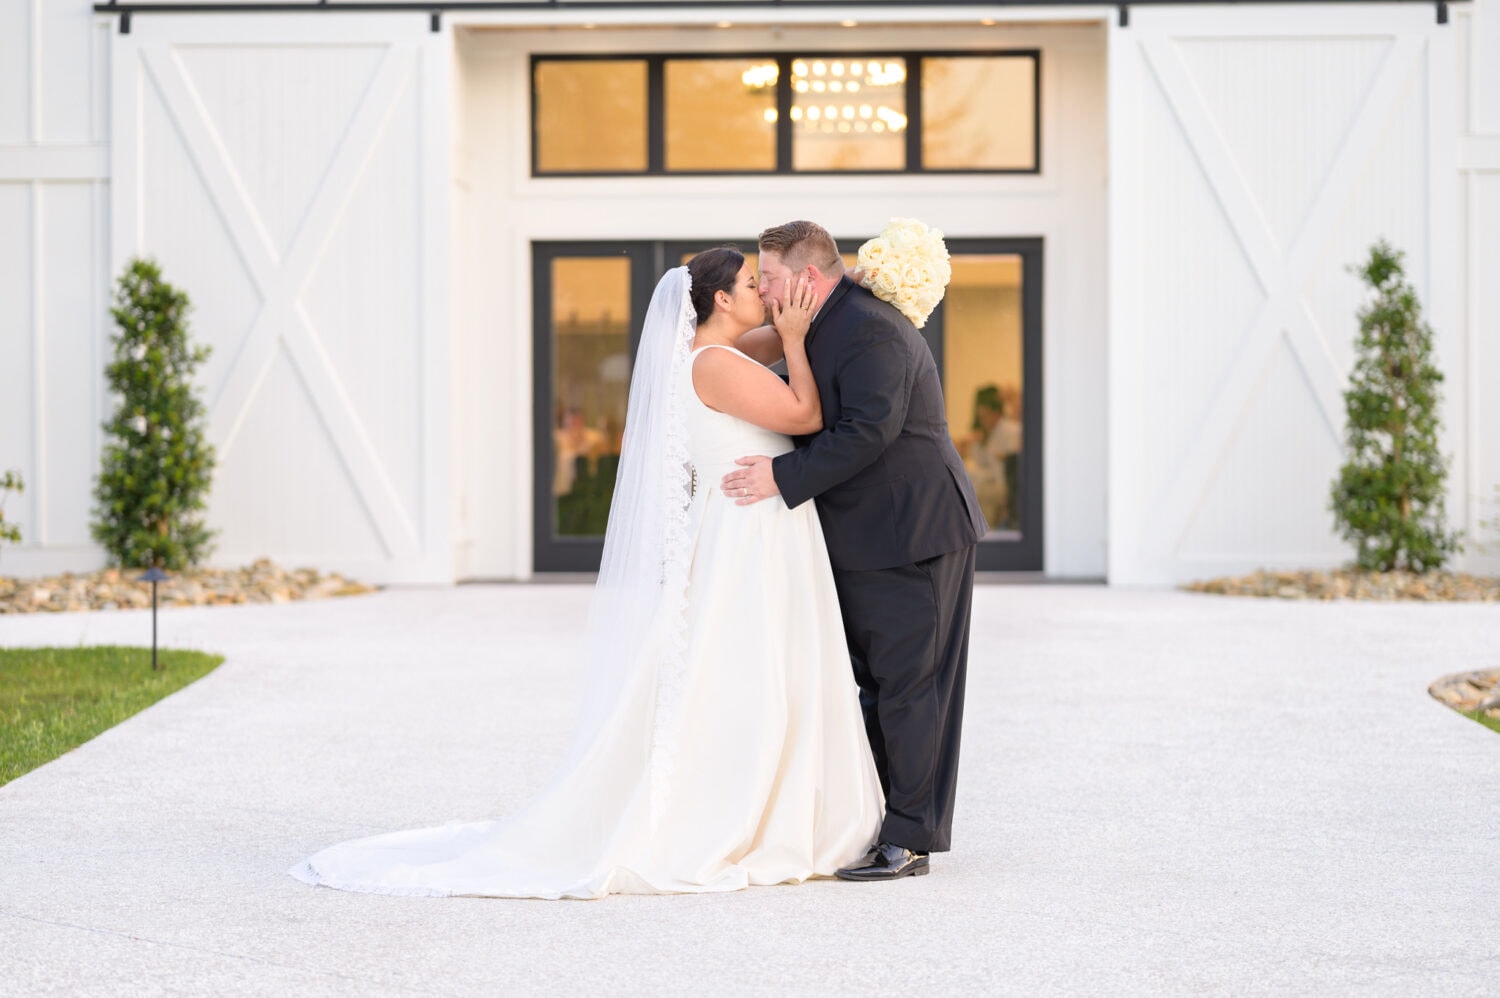 Kiss in front of the black doors - The Venue at White Oaks Farm